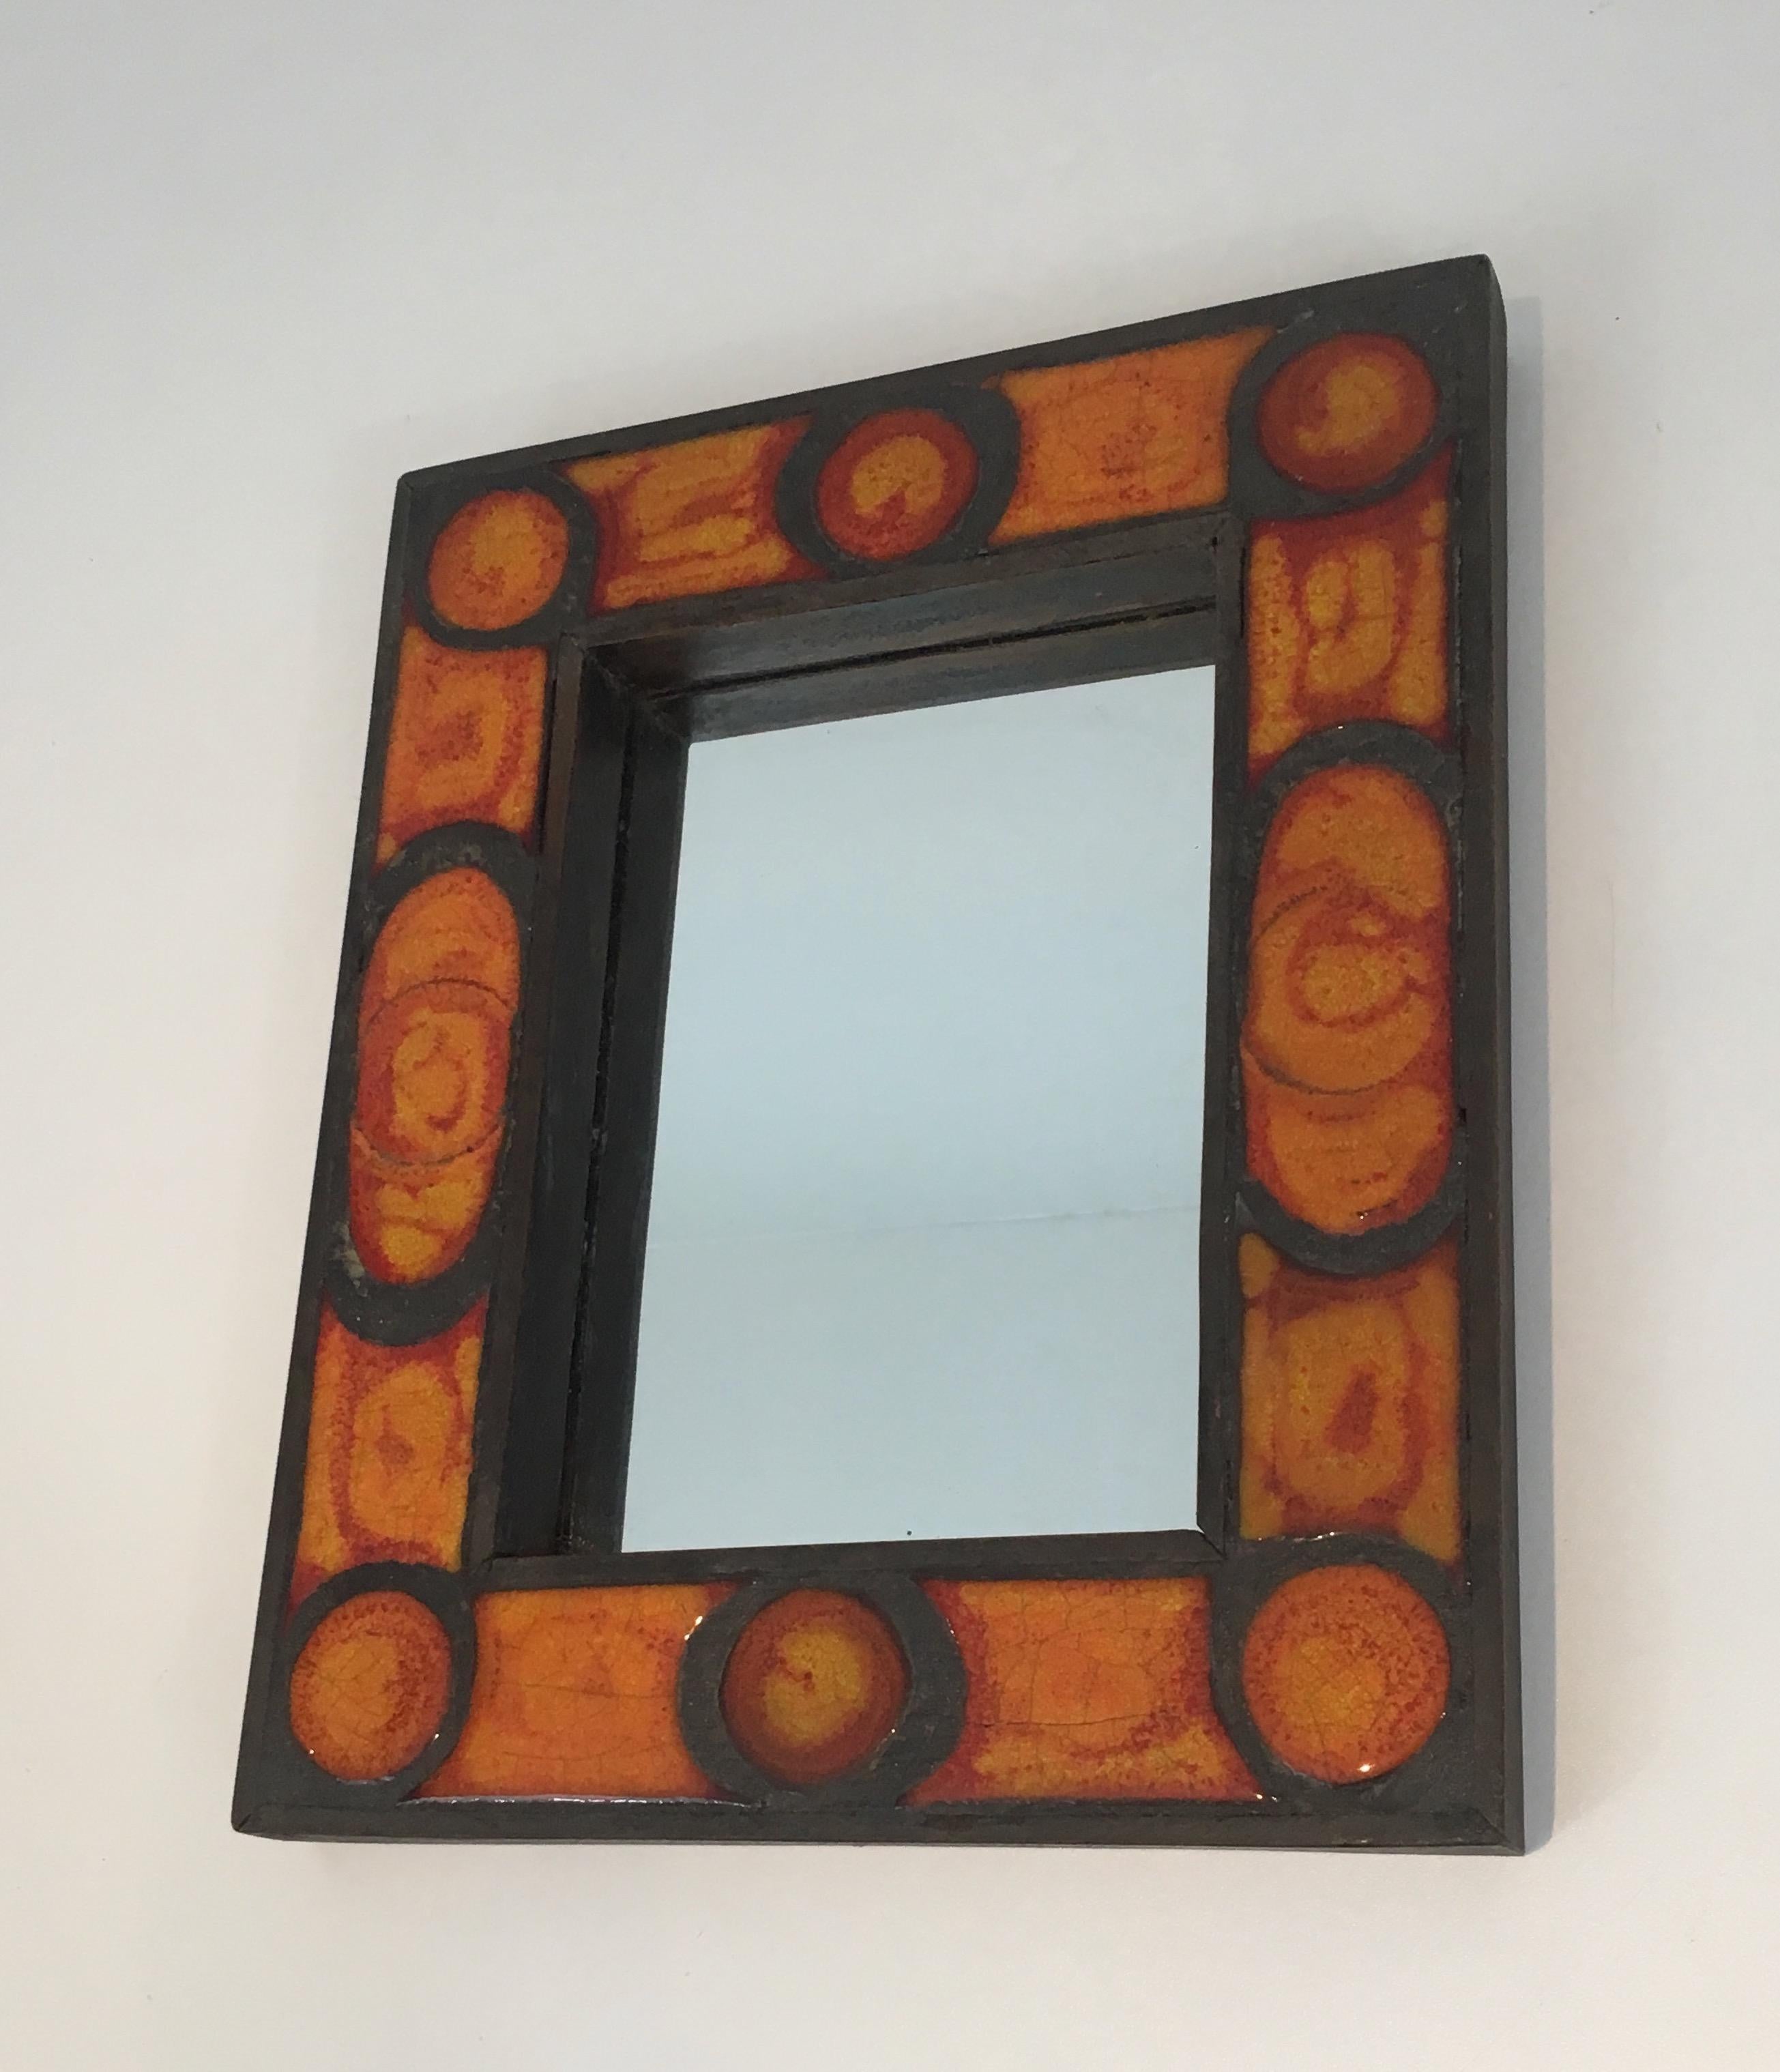 This very nice and interesting small mirror is made of ceramic in the orange tons. This is a very nice French work, circa 1970.